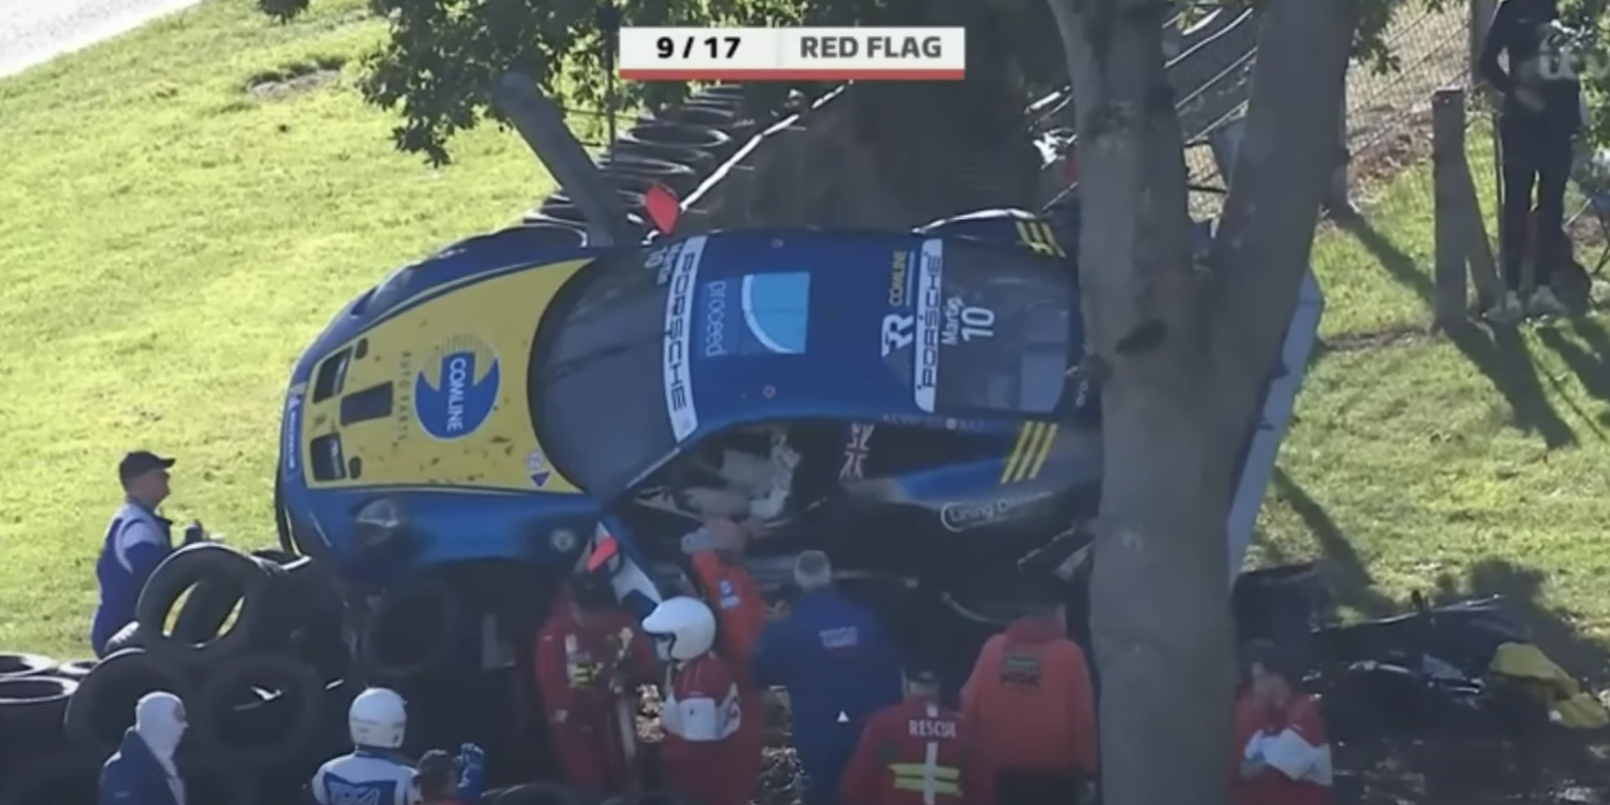 Porsche 911 GT3 Race Car Performs Fly Over at Brands Hatch, Lands in Tree